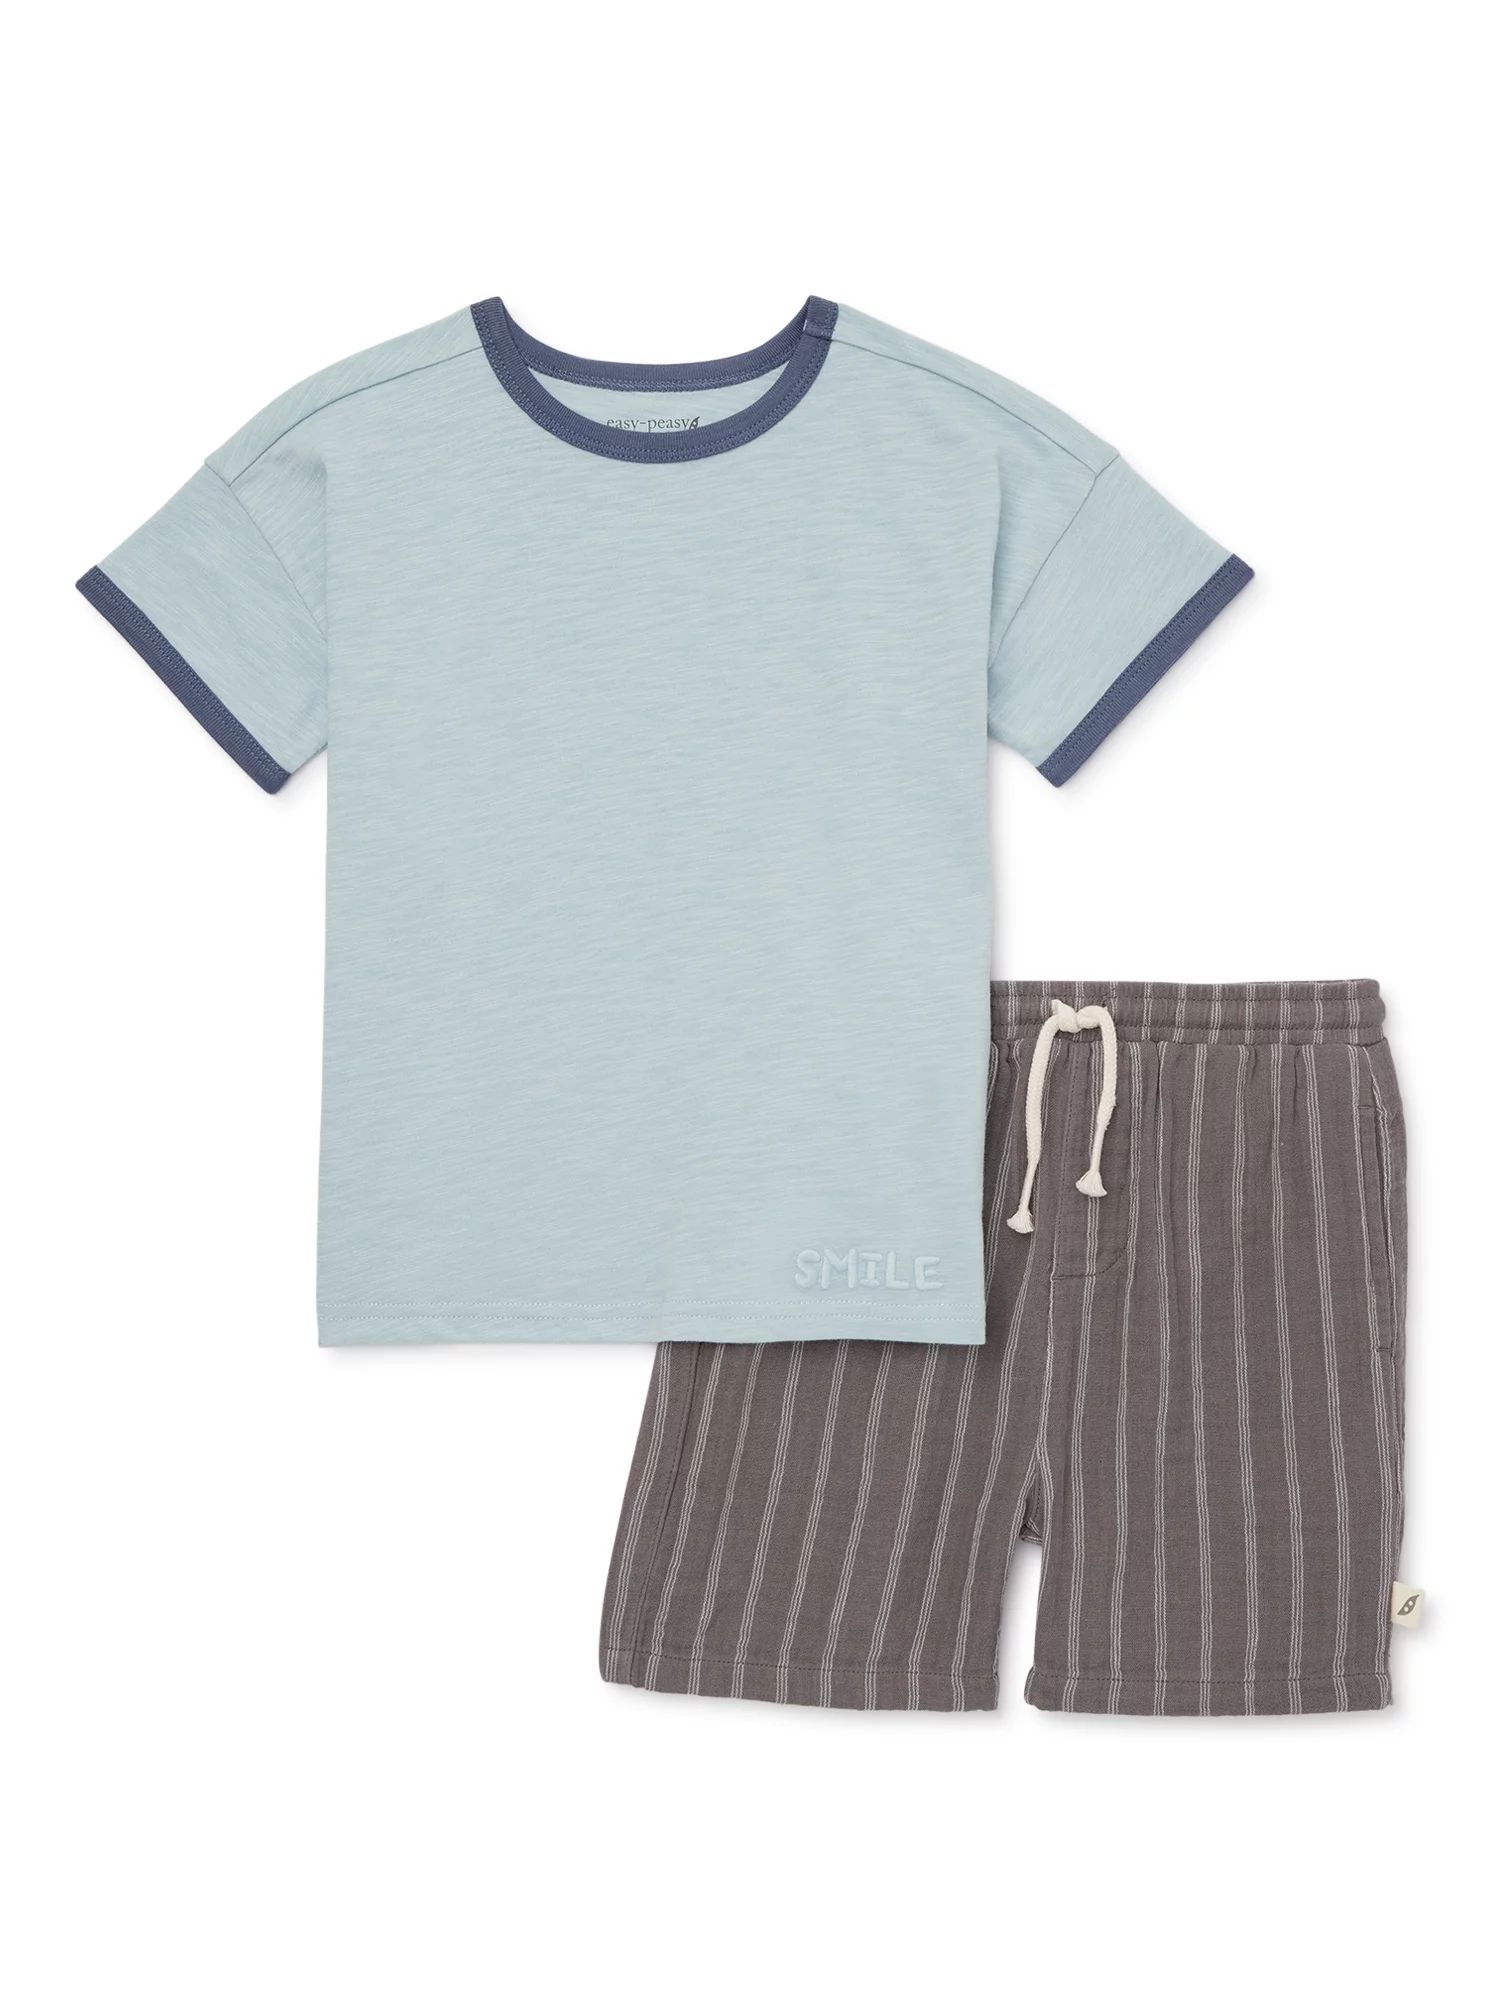 easy-peasy Toddler Boys Short Sleeve Tee and Shorts Outfit Set, 2-Piece, Sizes 12M-5T | Walmart (US)